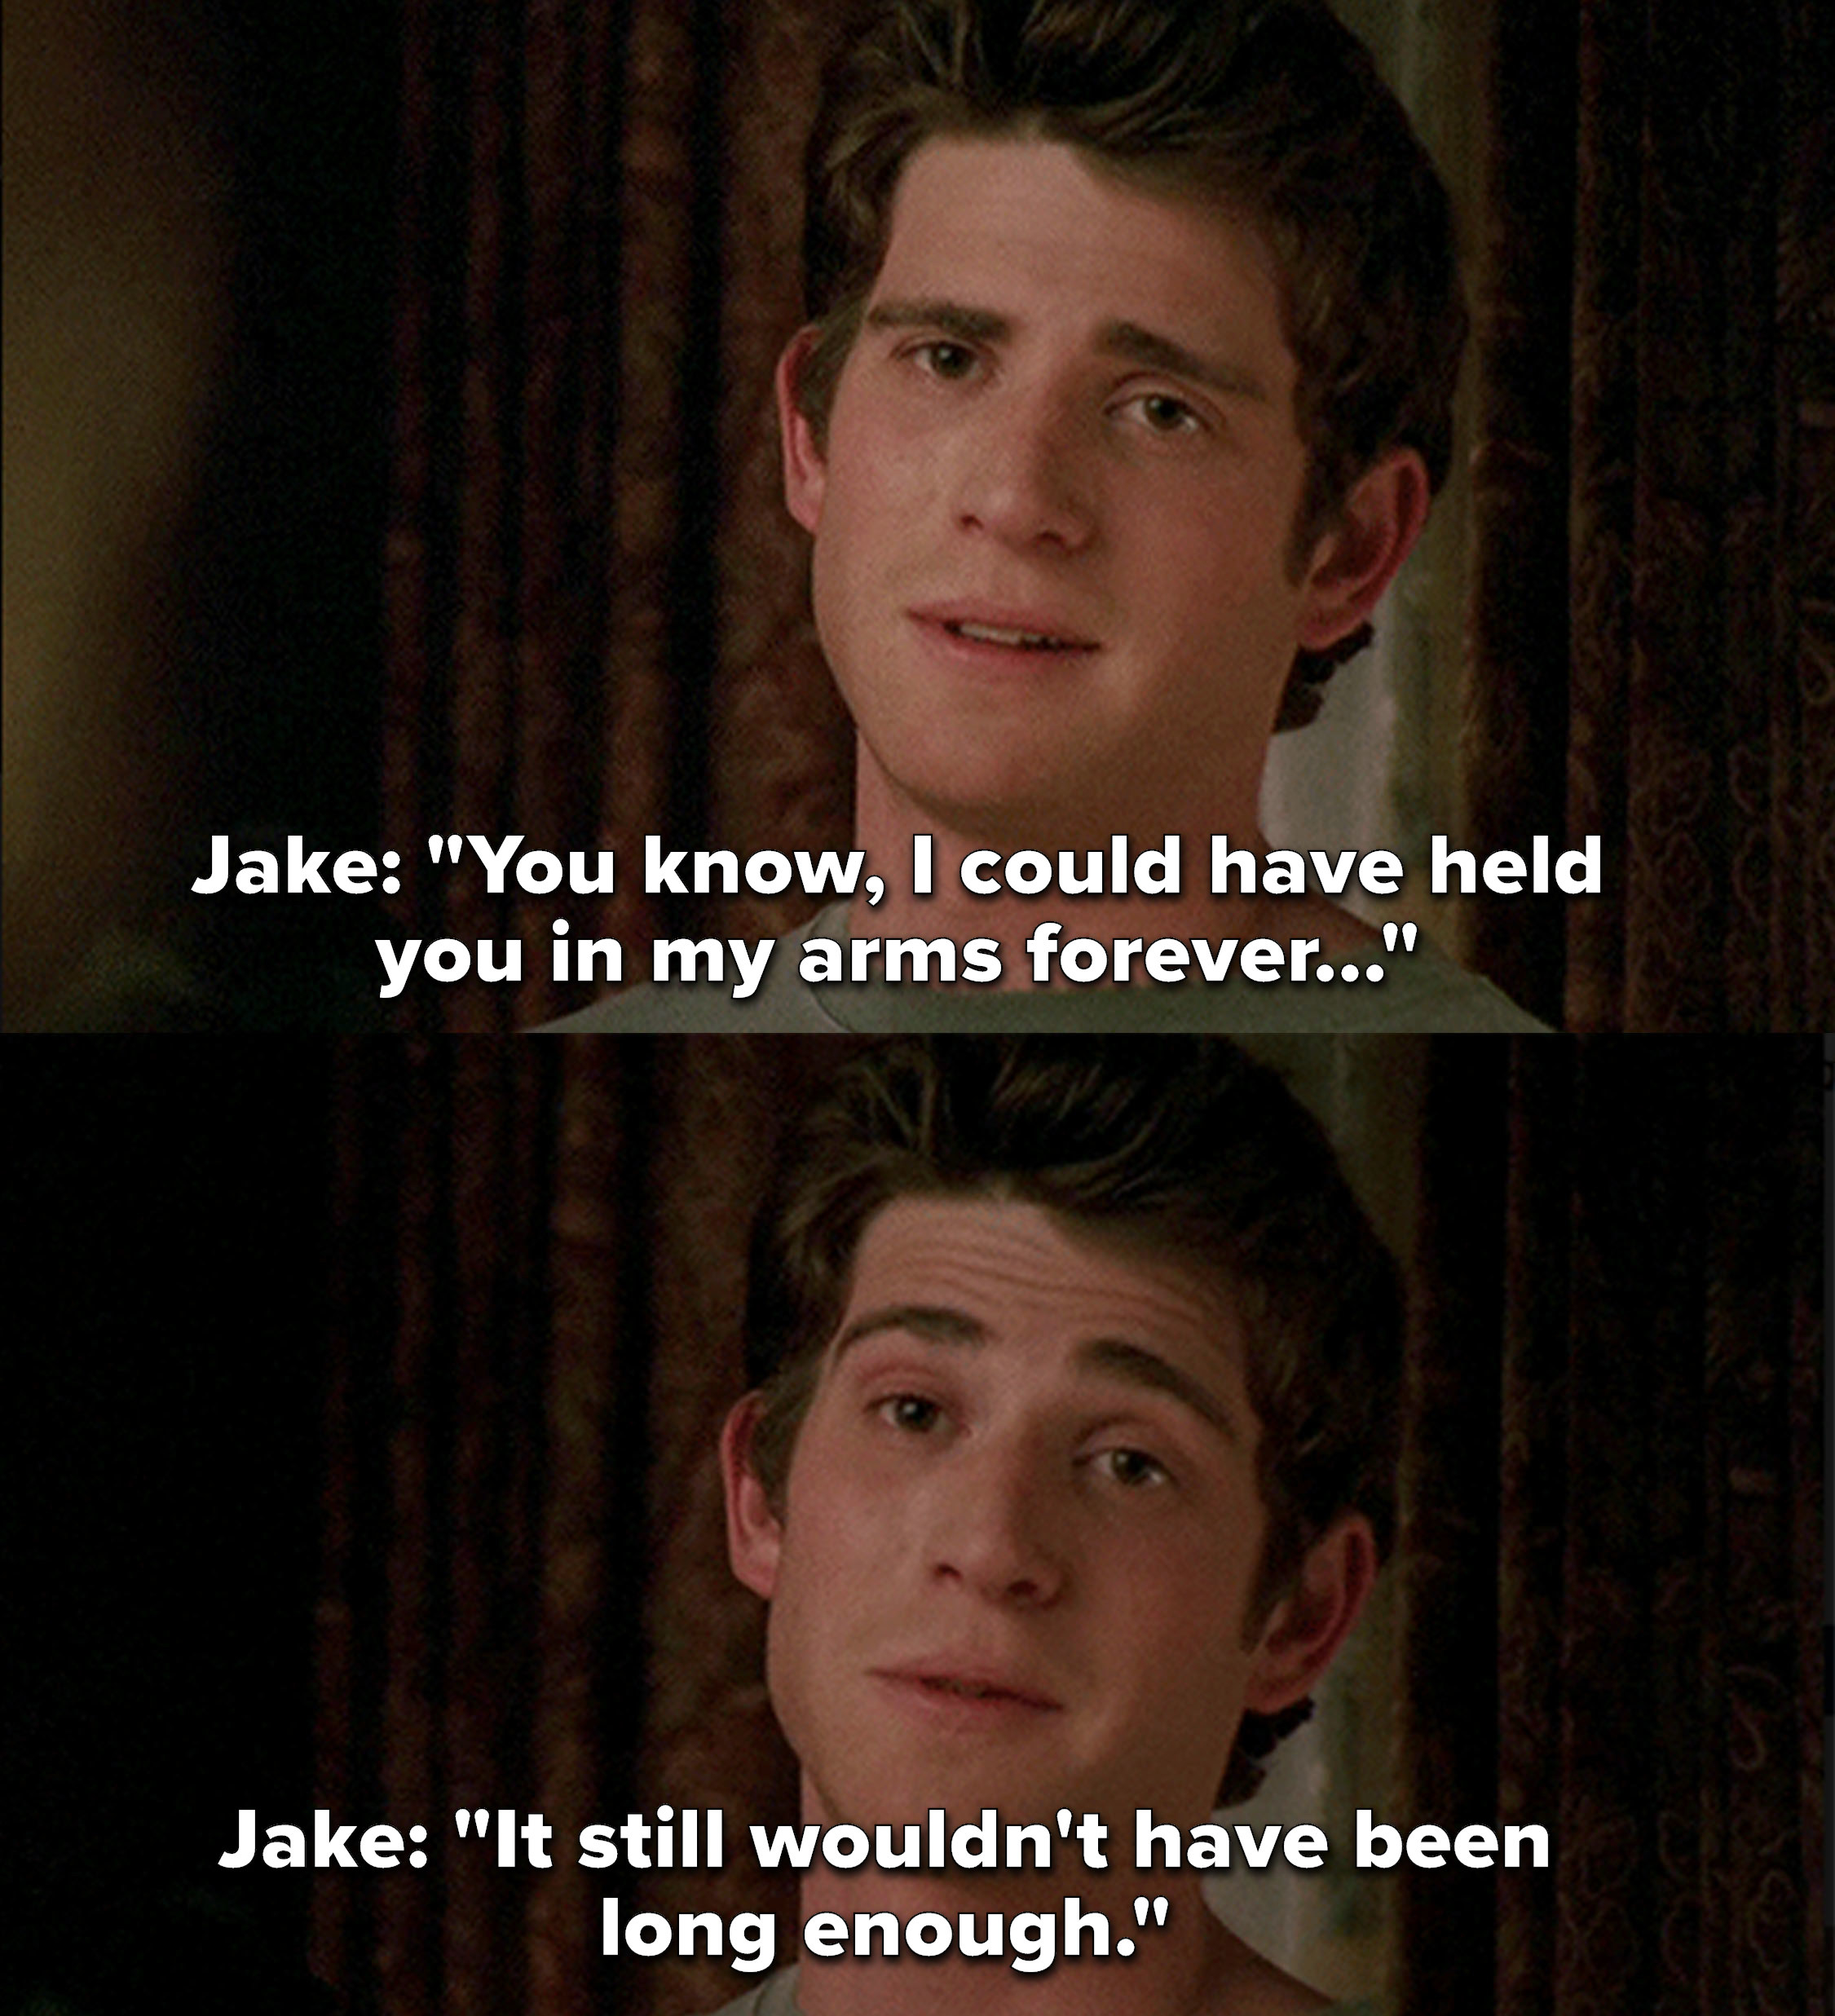 Jake: &quot;I could have held you in my arms forever, it still wouldn&#x27;t have been long enough&quot;